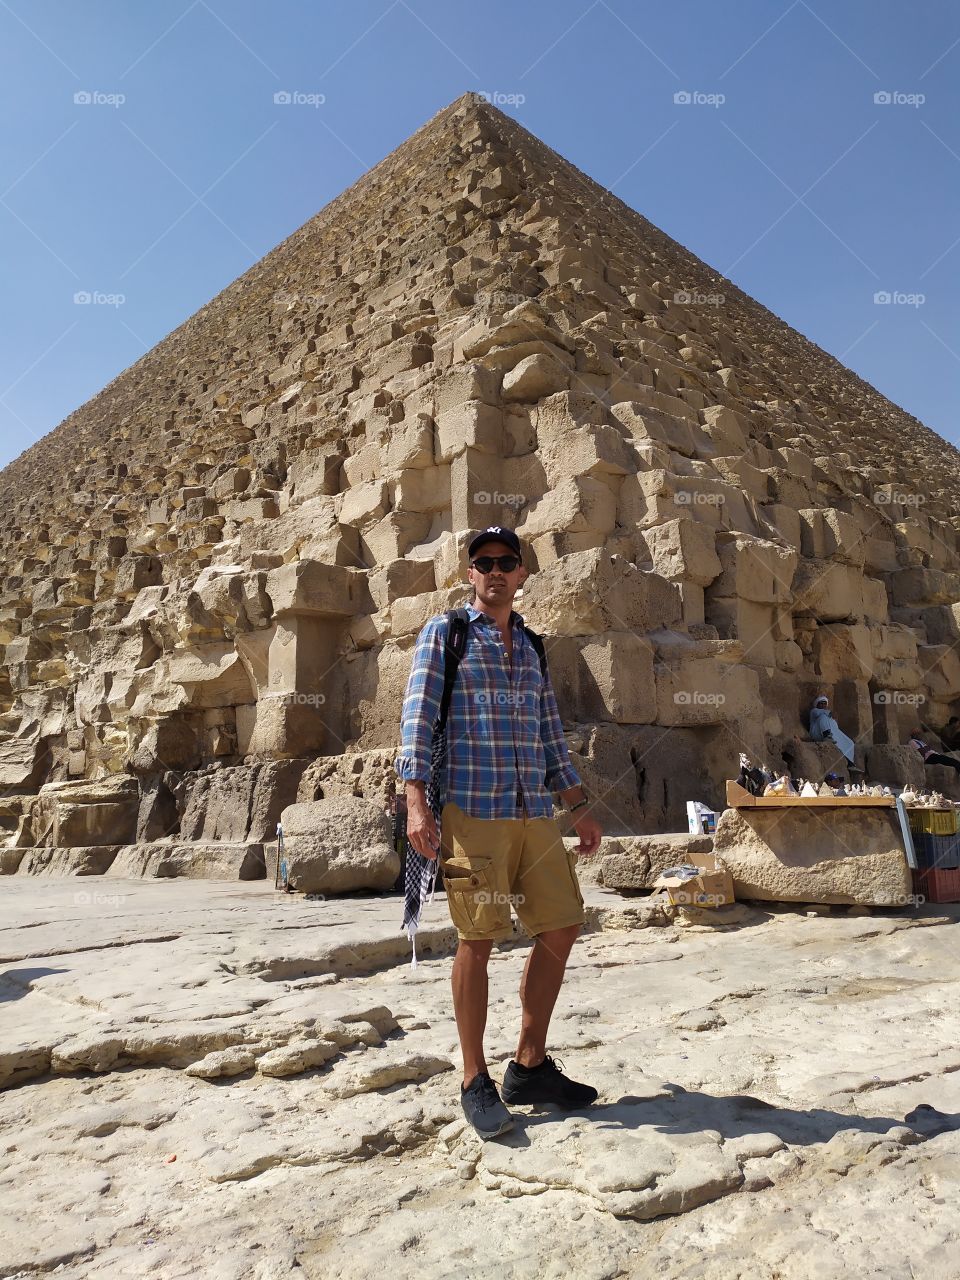 very action photo for color is natural and brighter color and background great pyramid.